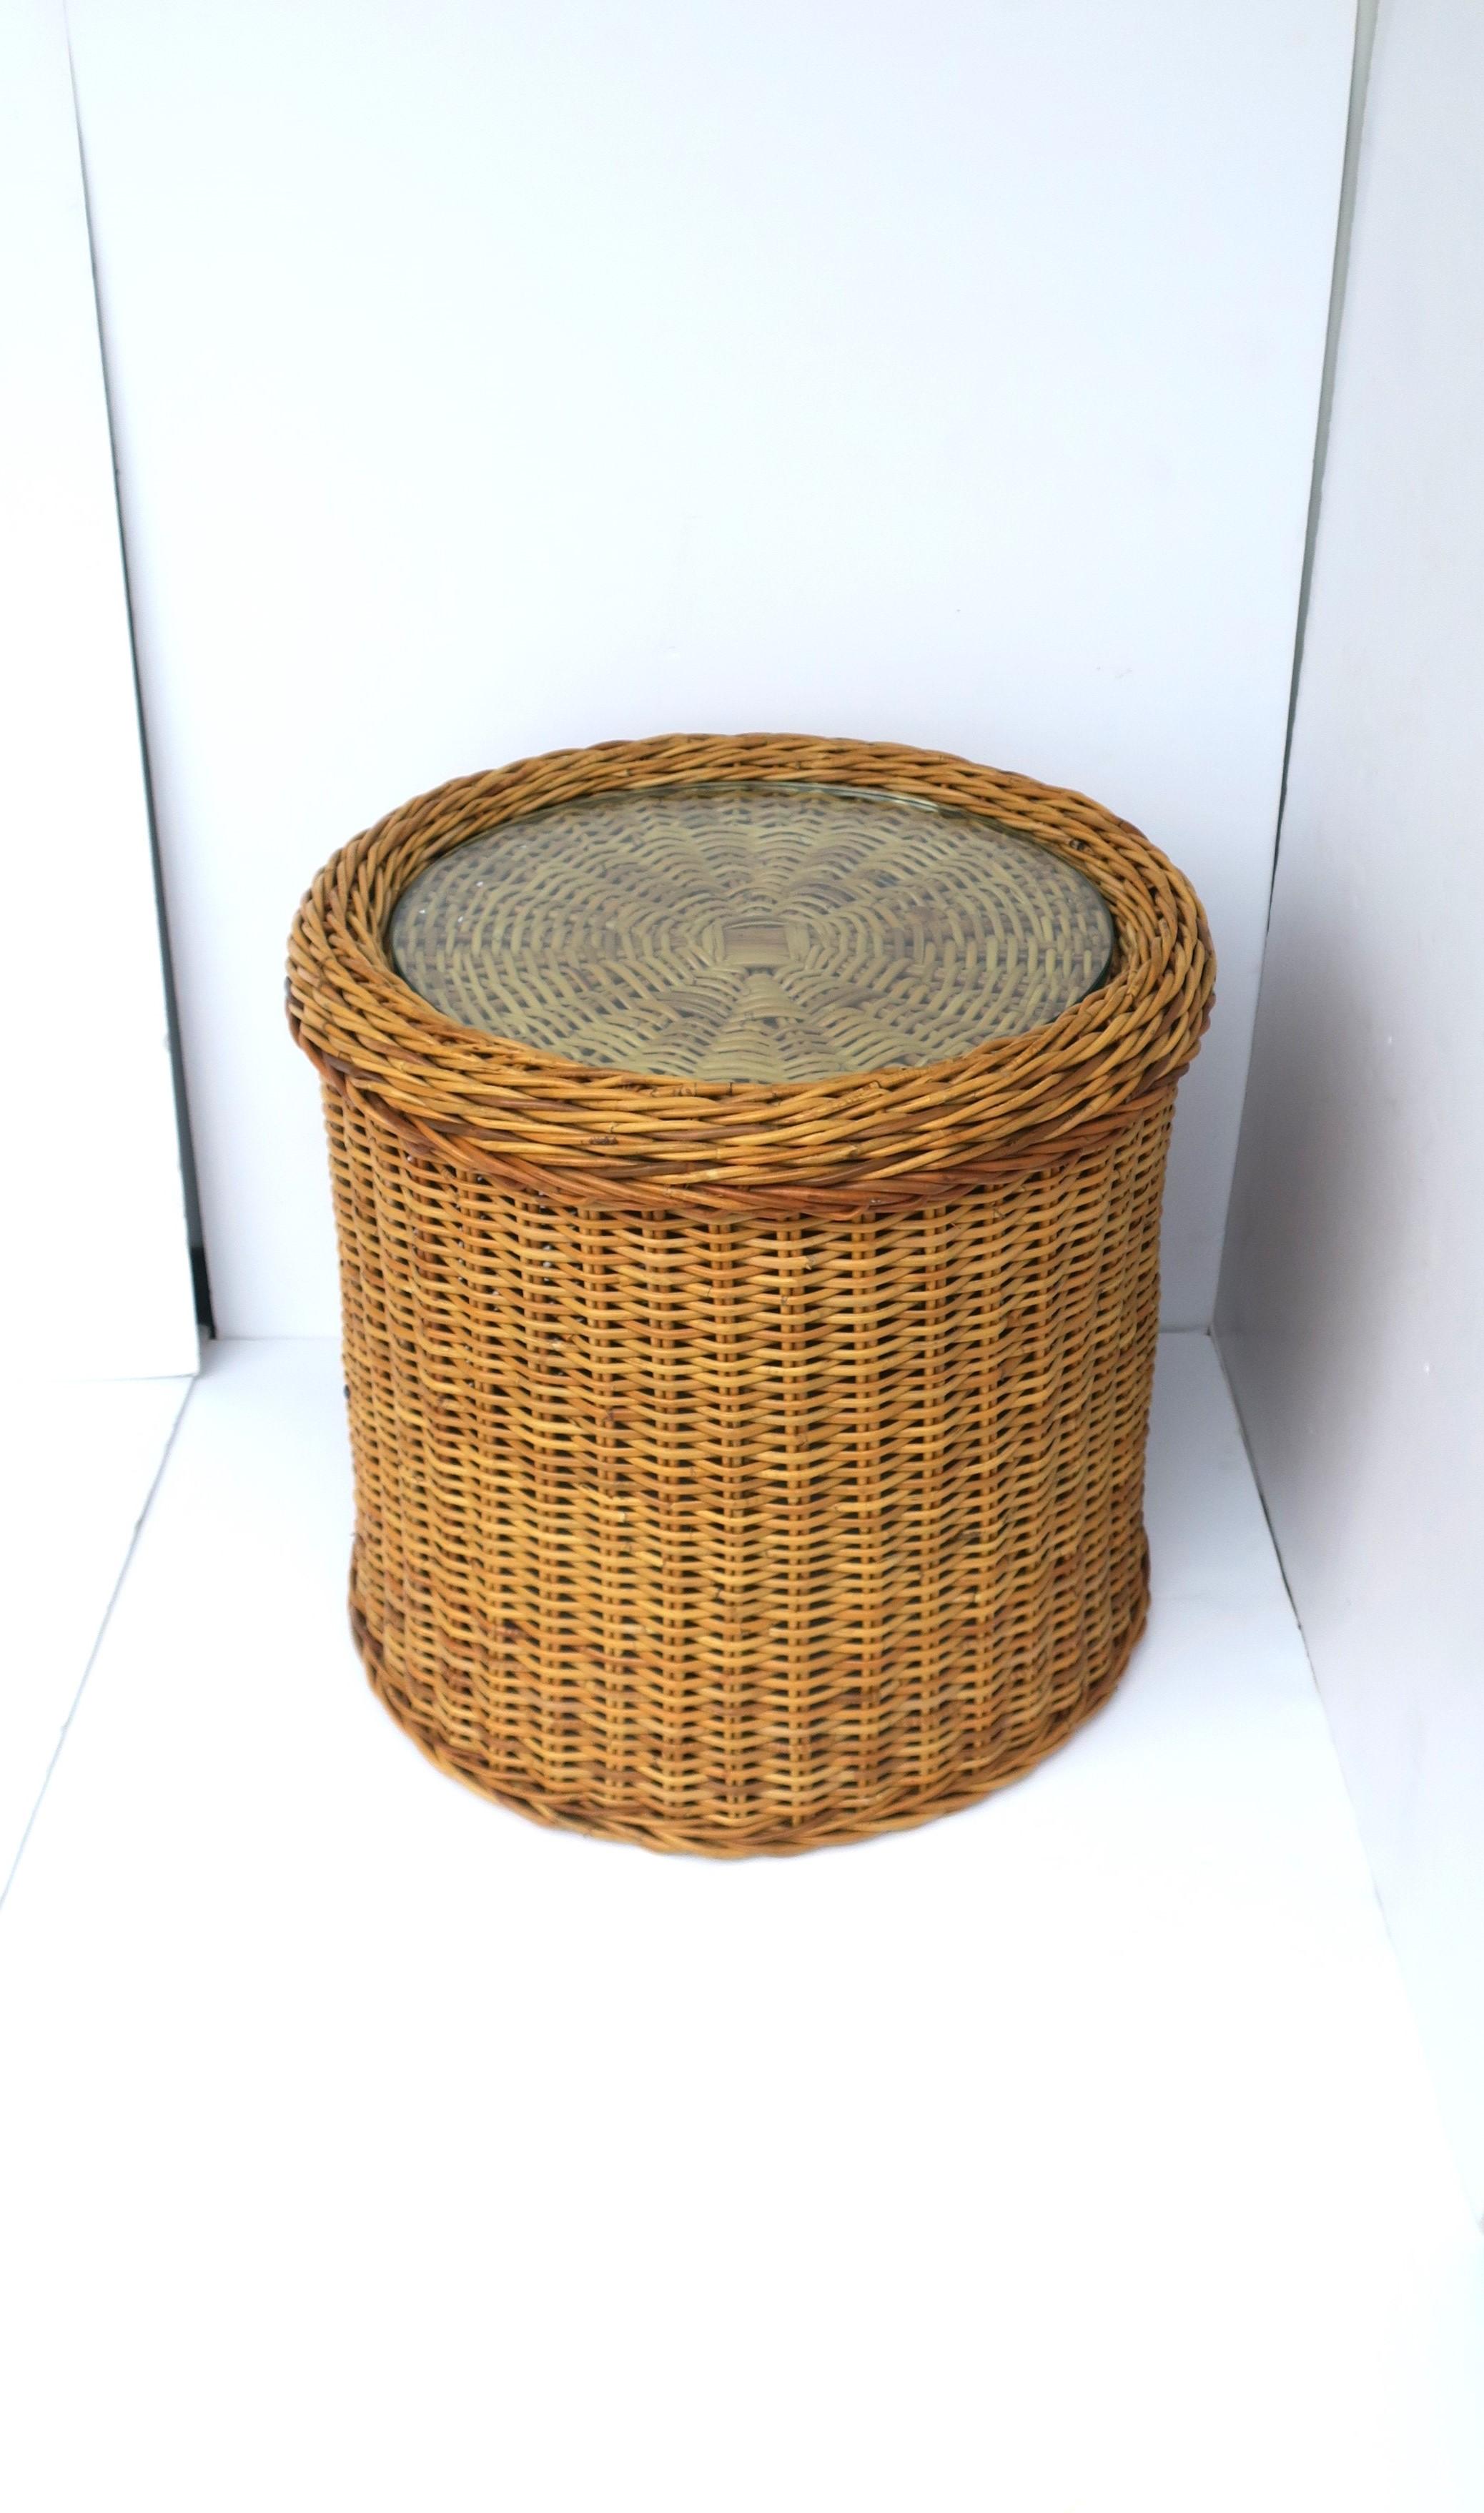 A quality round wicker rattan side or end table with glass top, circa late-20th century. A well-made round side or end table with inset glass top in the style of McGuire Furniture Co. Glass top is 1/2